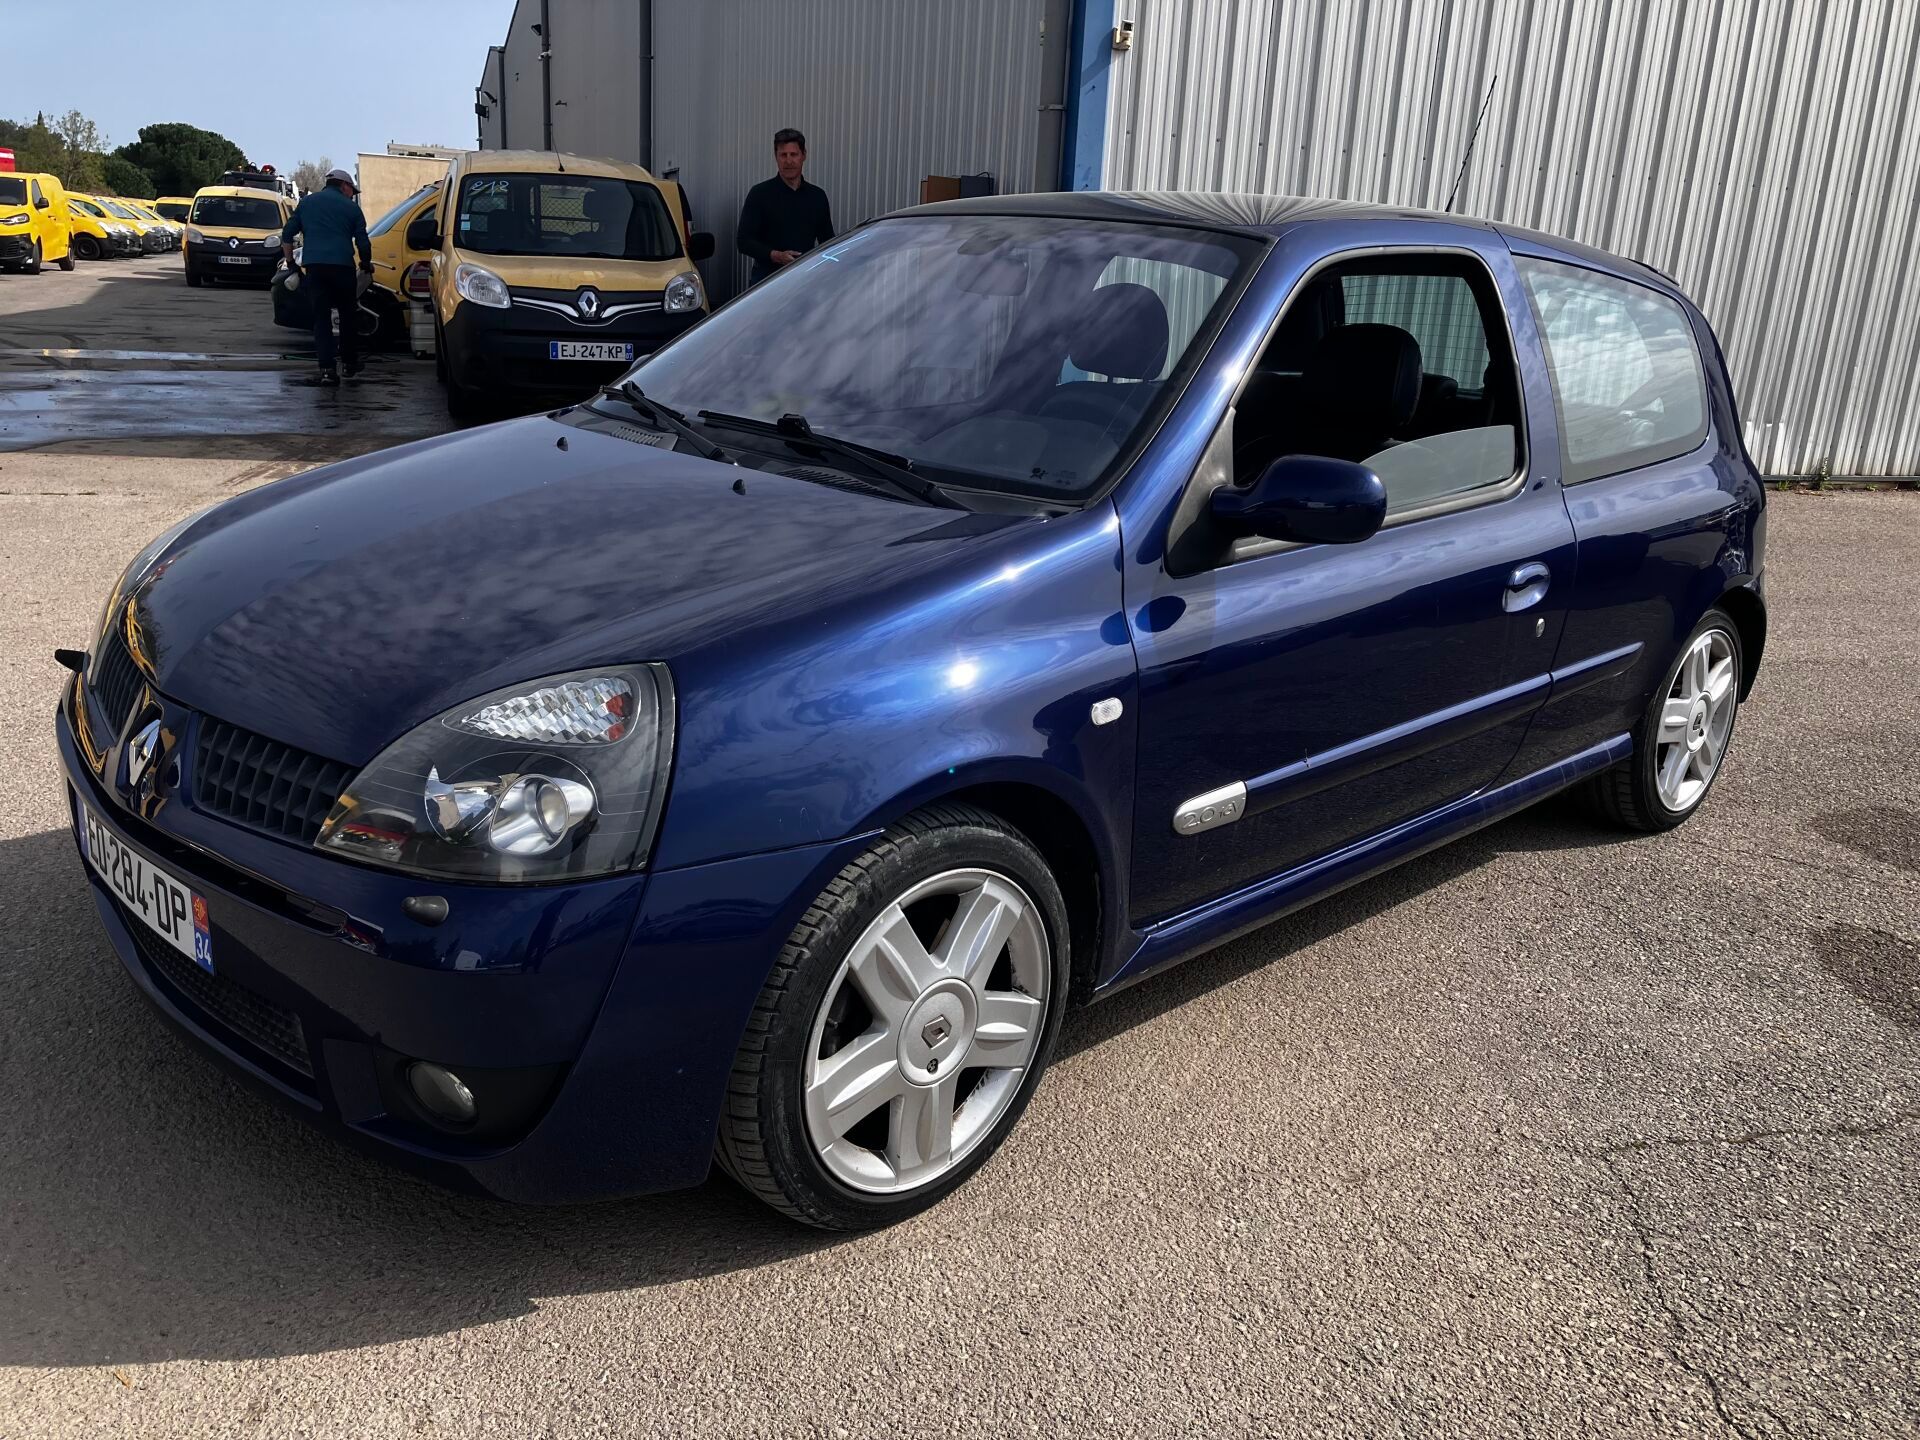 Null CLIO 2 RS 2.0L 170 HP
VP RENAULT CLIO 2 RS 2.0L 170 HP RS
Body : CI
Serial &hellip;